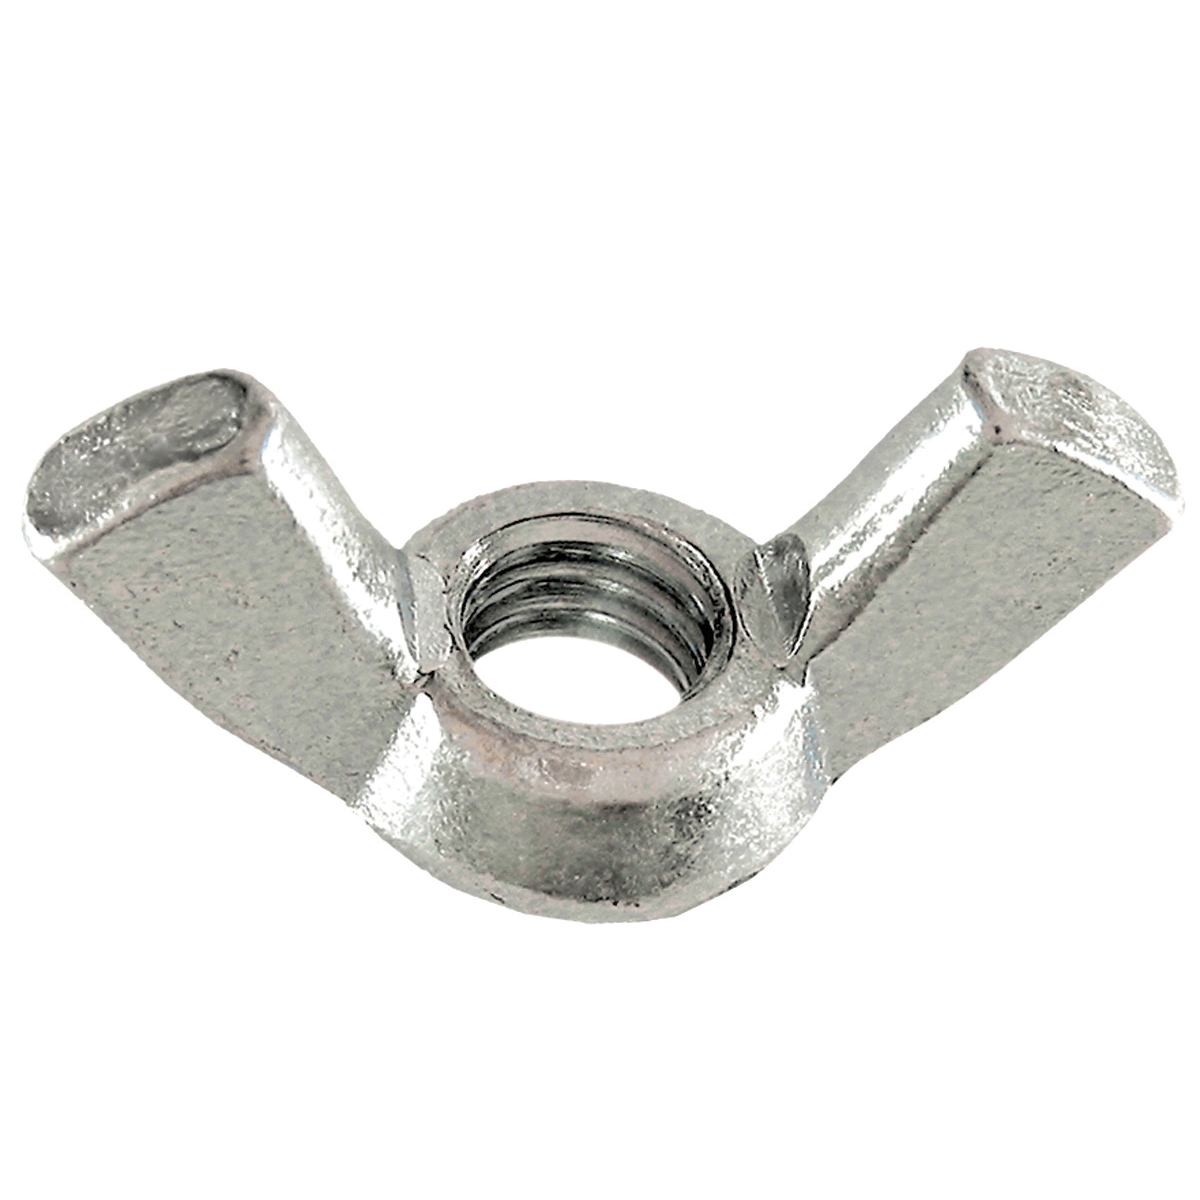 Paulin® 5038-014 Wing Nut, 1/4-20, Stainless Steel, 18-8 Material Grade